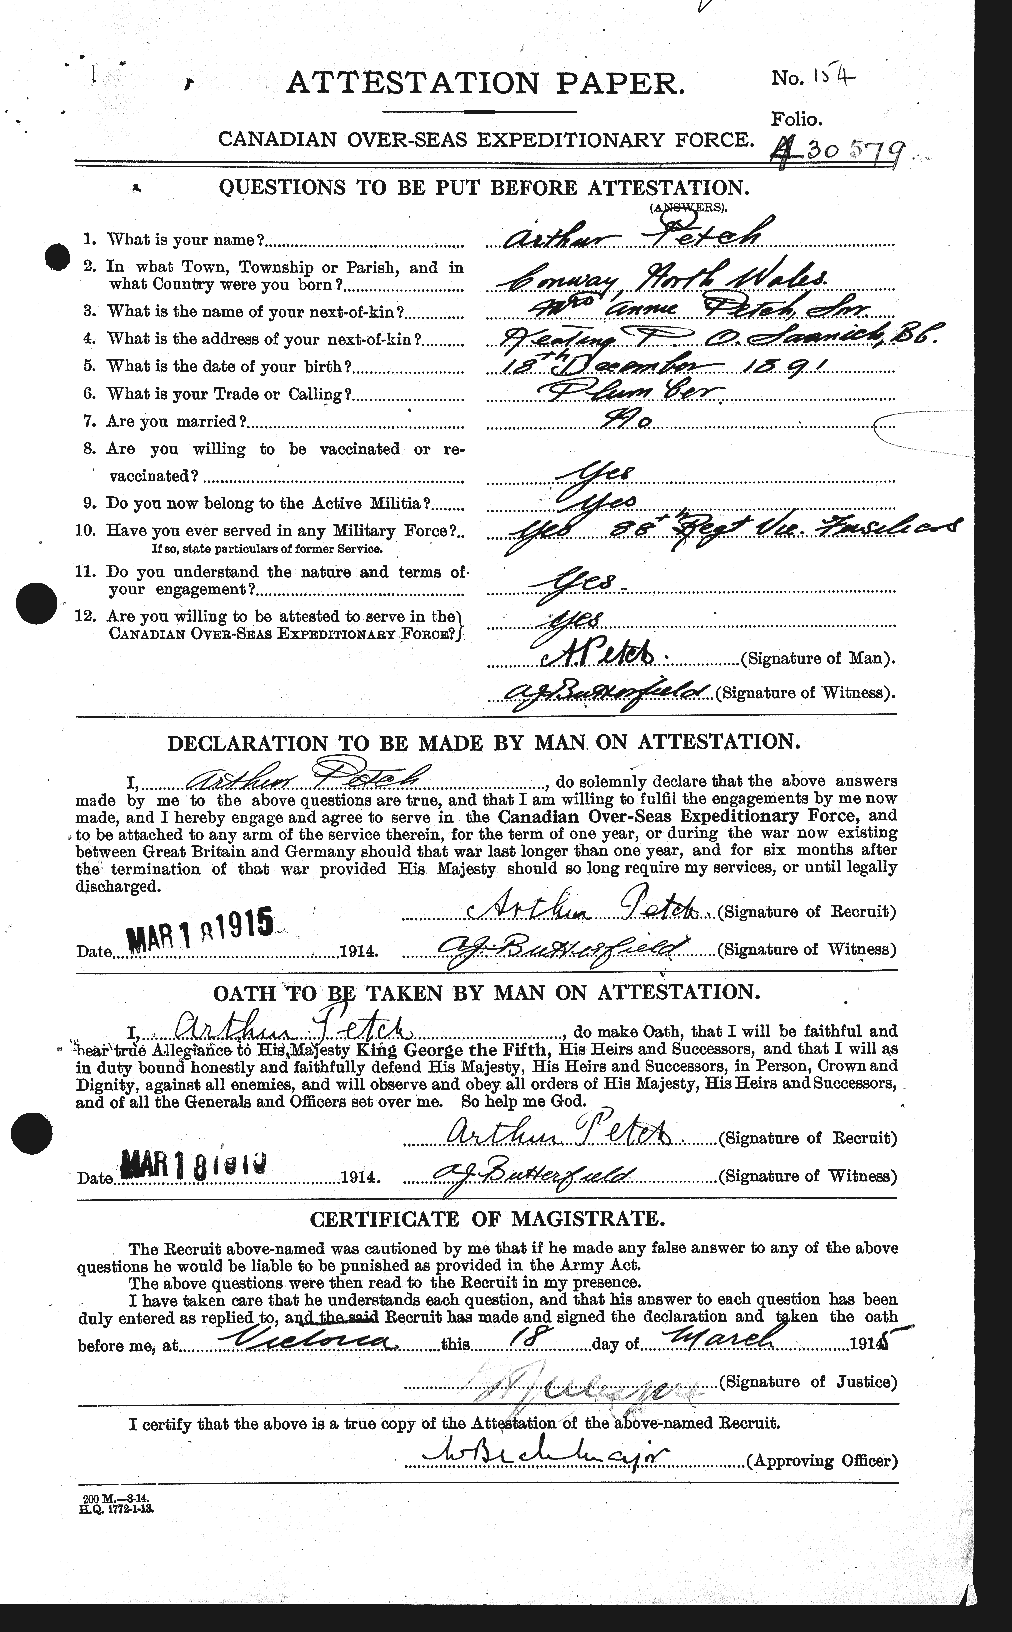 Personnel Records of the First World War - CEF 575250a